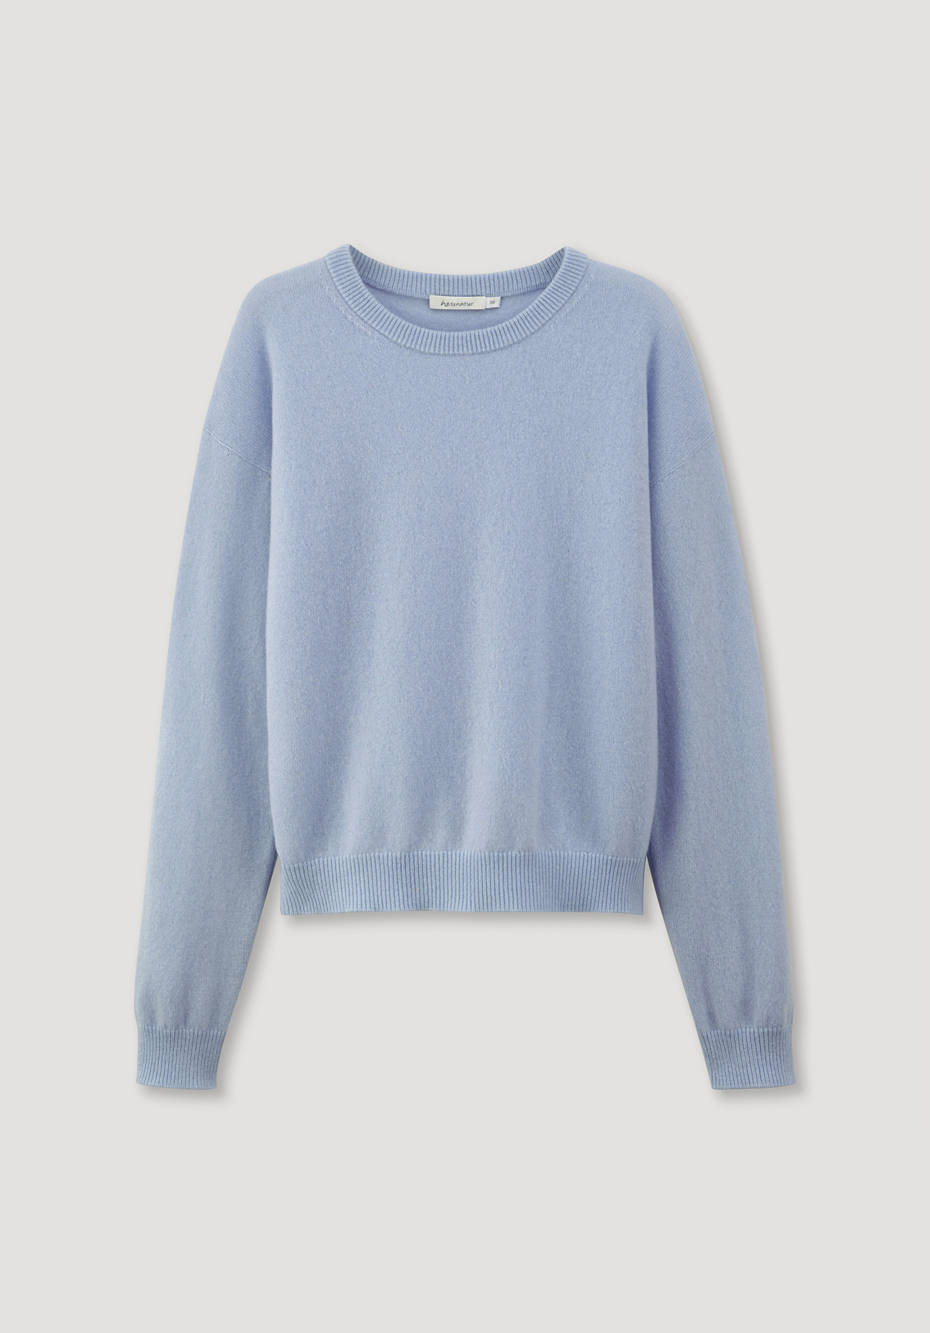 Regular sweater made of pure cashmere